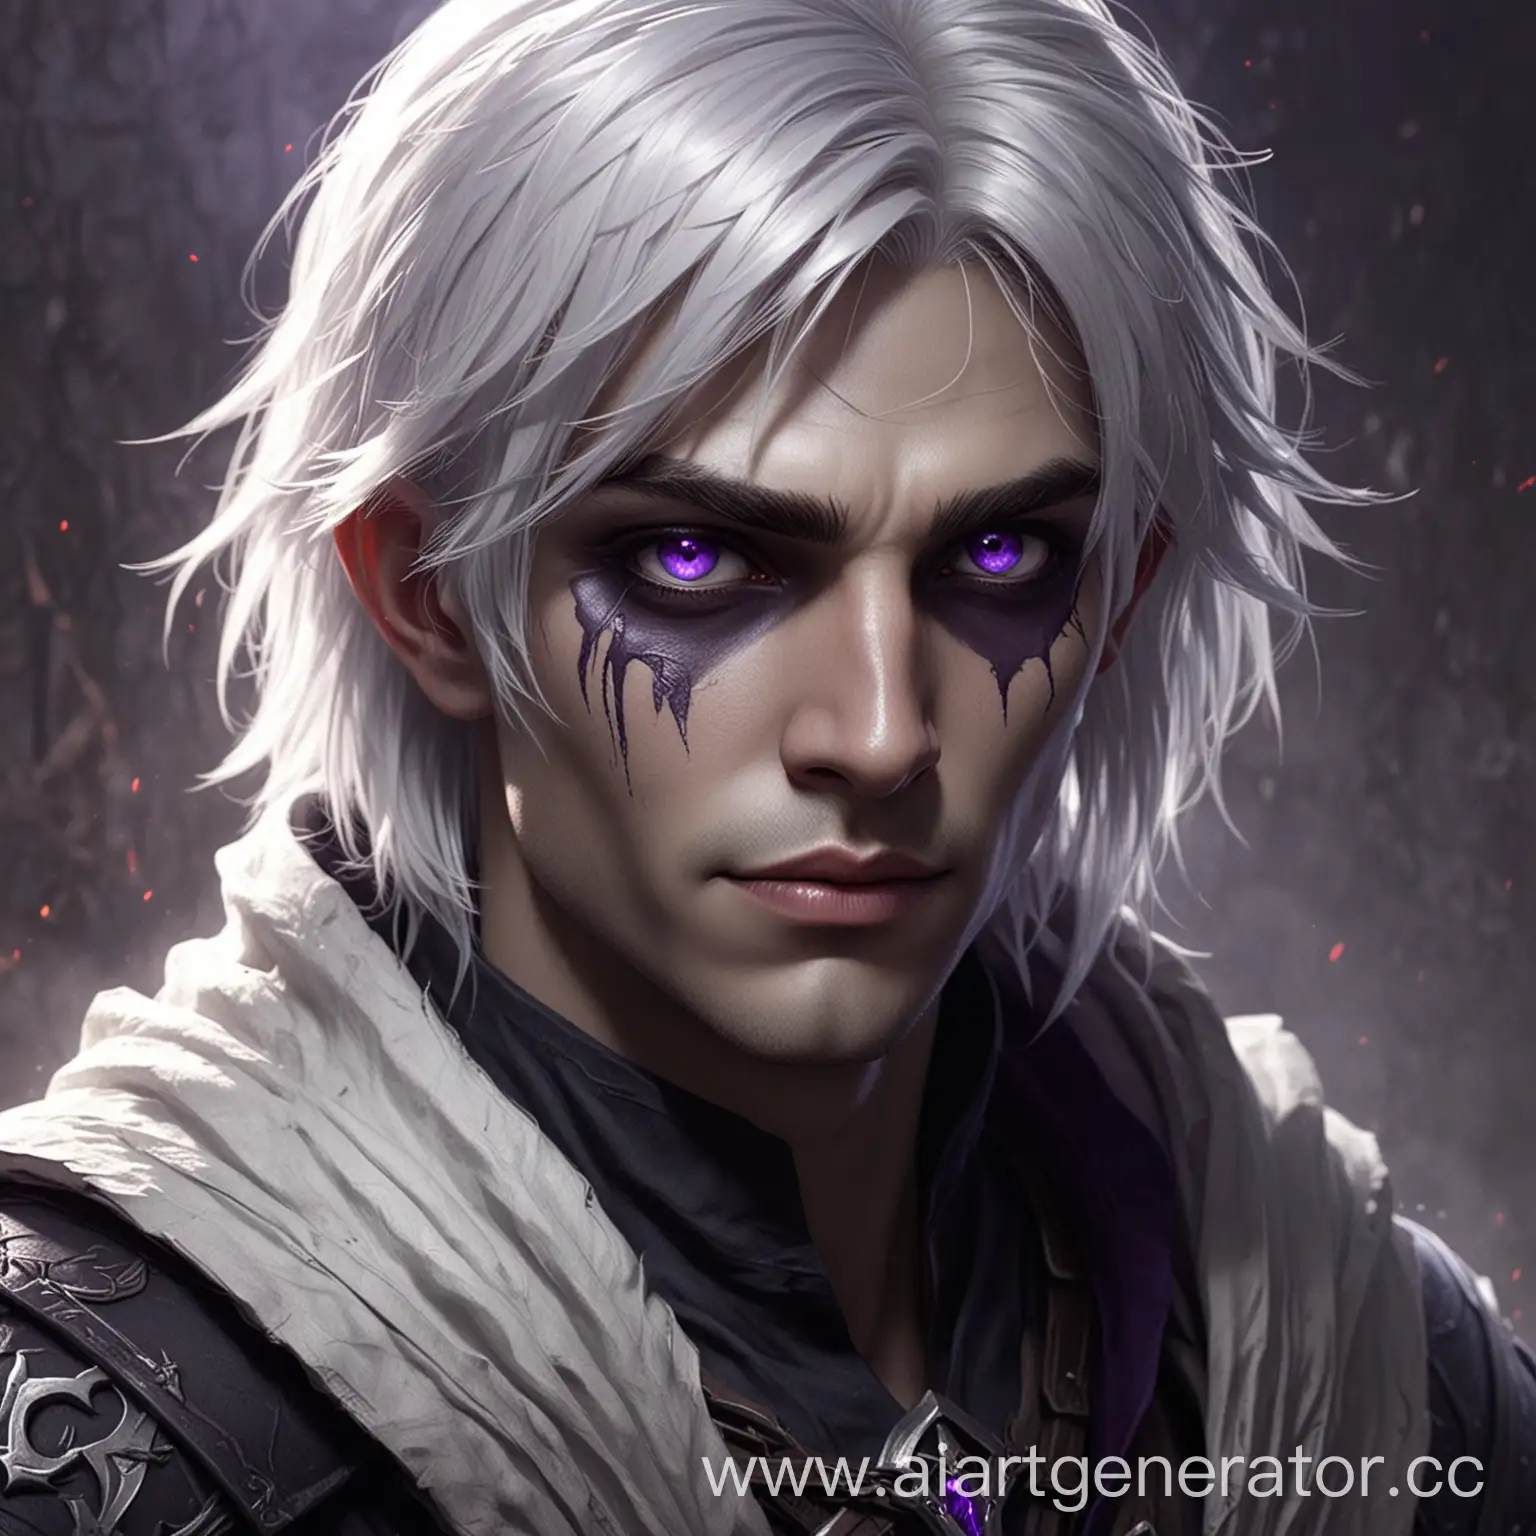 Young-Rogue-Drow-with-Purple-Eyes-and-White-Hair